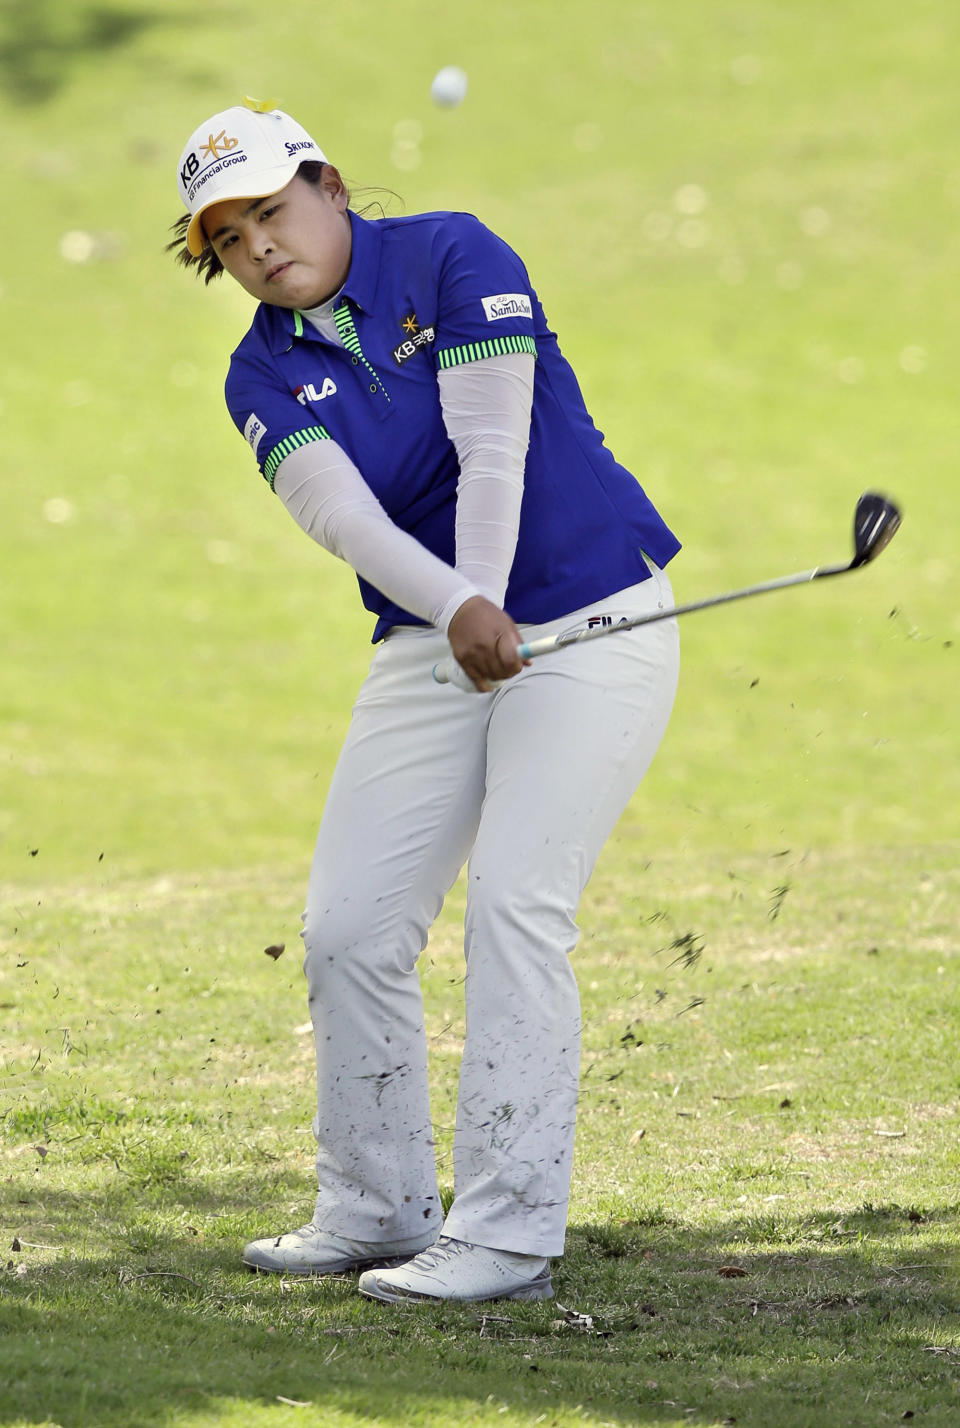 Inbee Park, of South Korea, hits on the first green during the second round of the North Texas LPGA Shootout golf tournament at Las Colinas Country Club in Irving, Texas, Friday, May 2, 2014. (AP Photo/LM Otero)